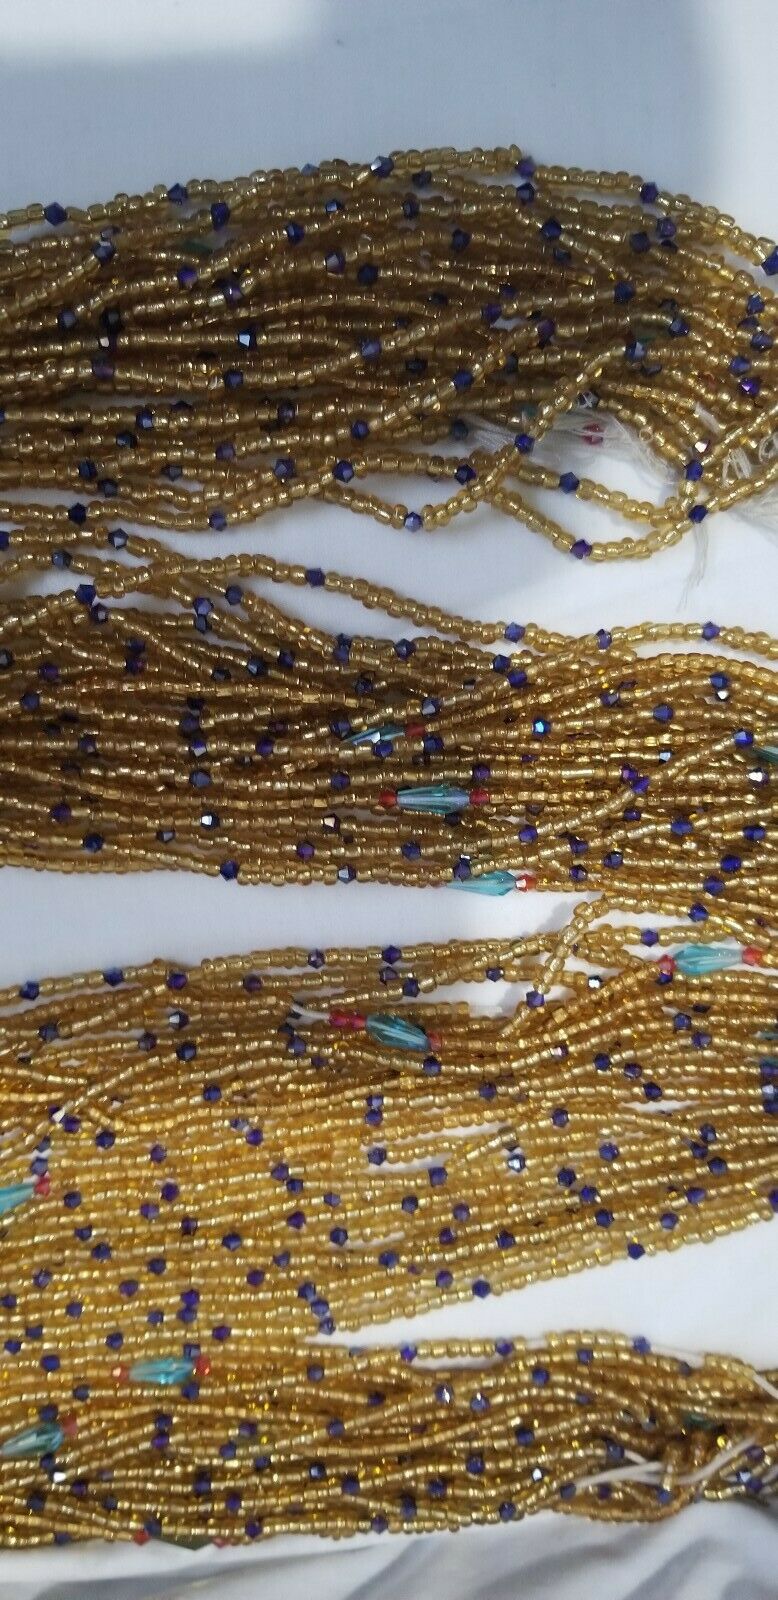 Amber Colored African waist Beads Long With Decorative Accents..46"-53"